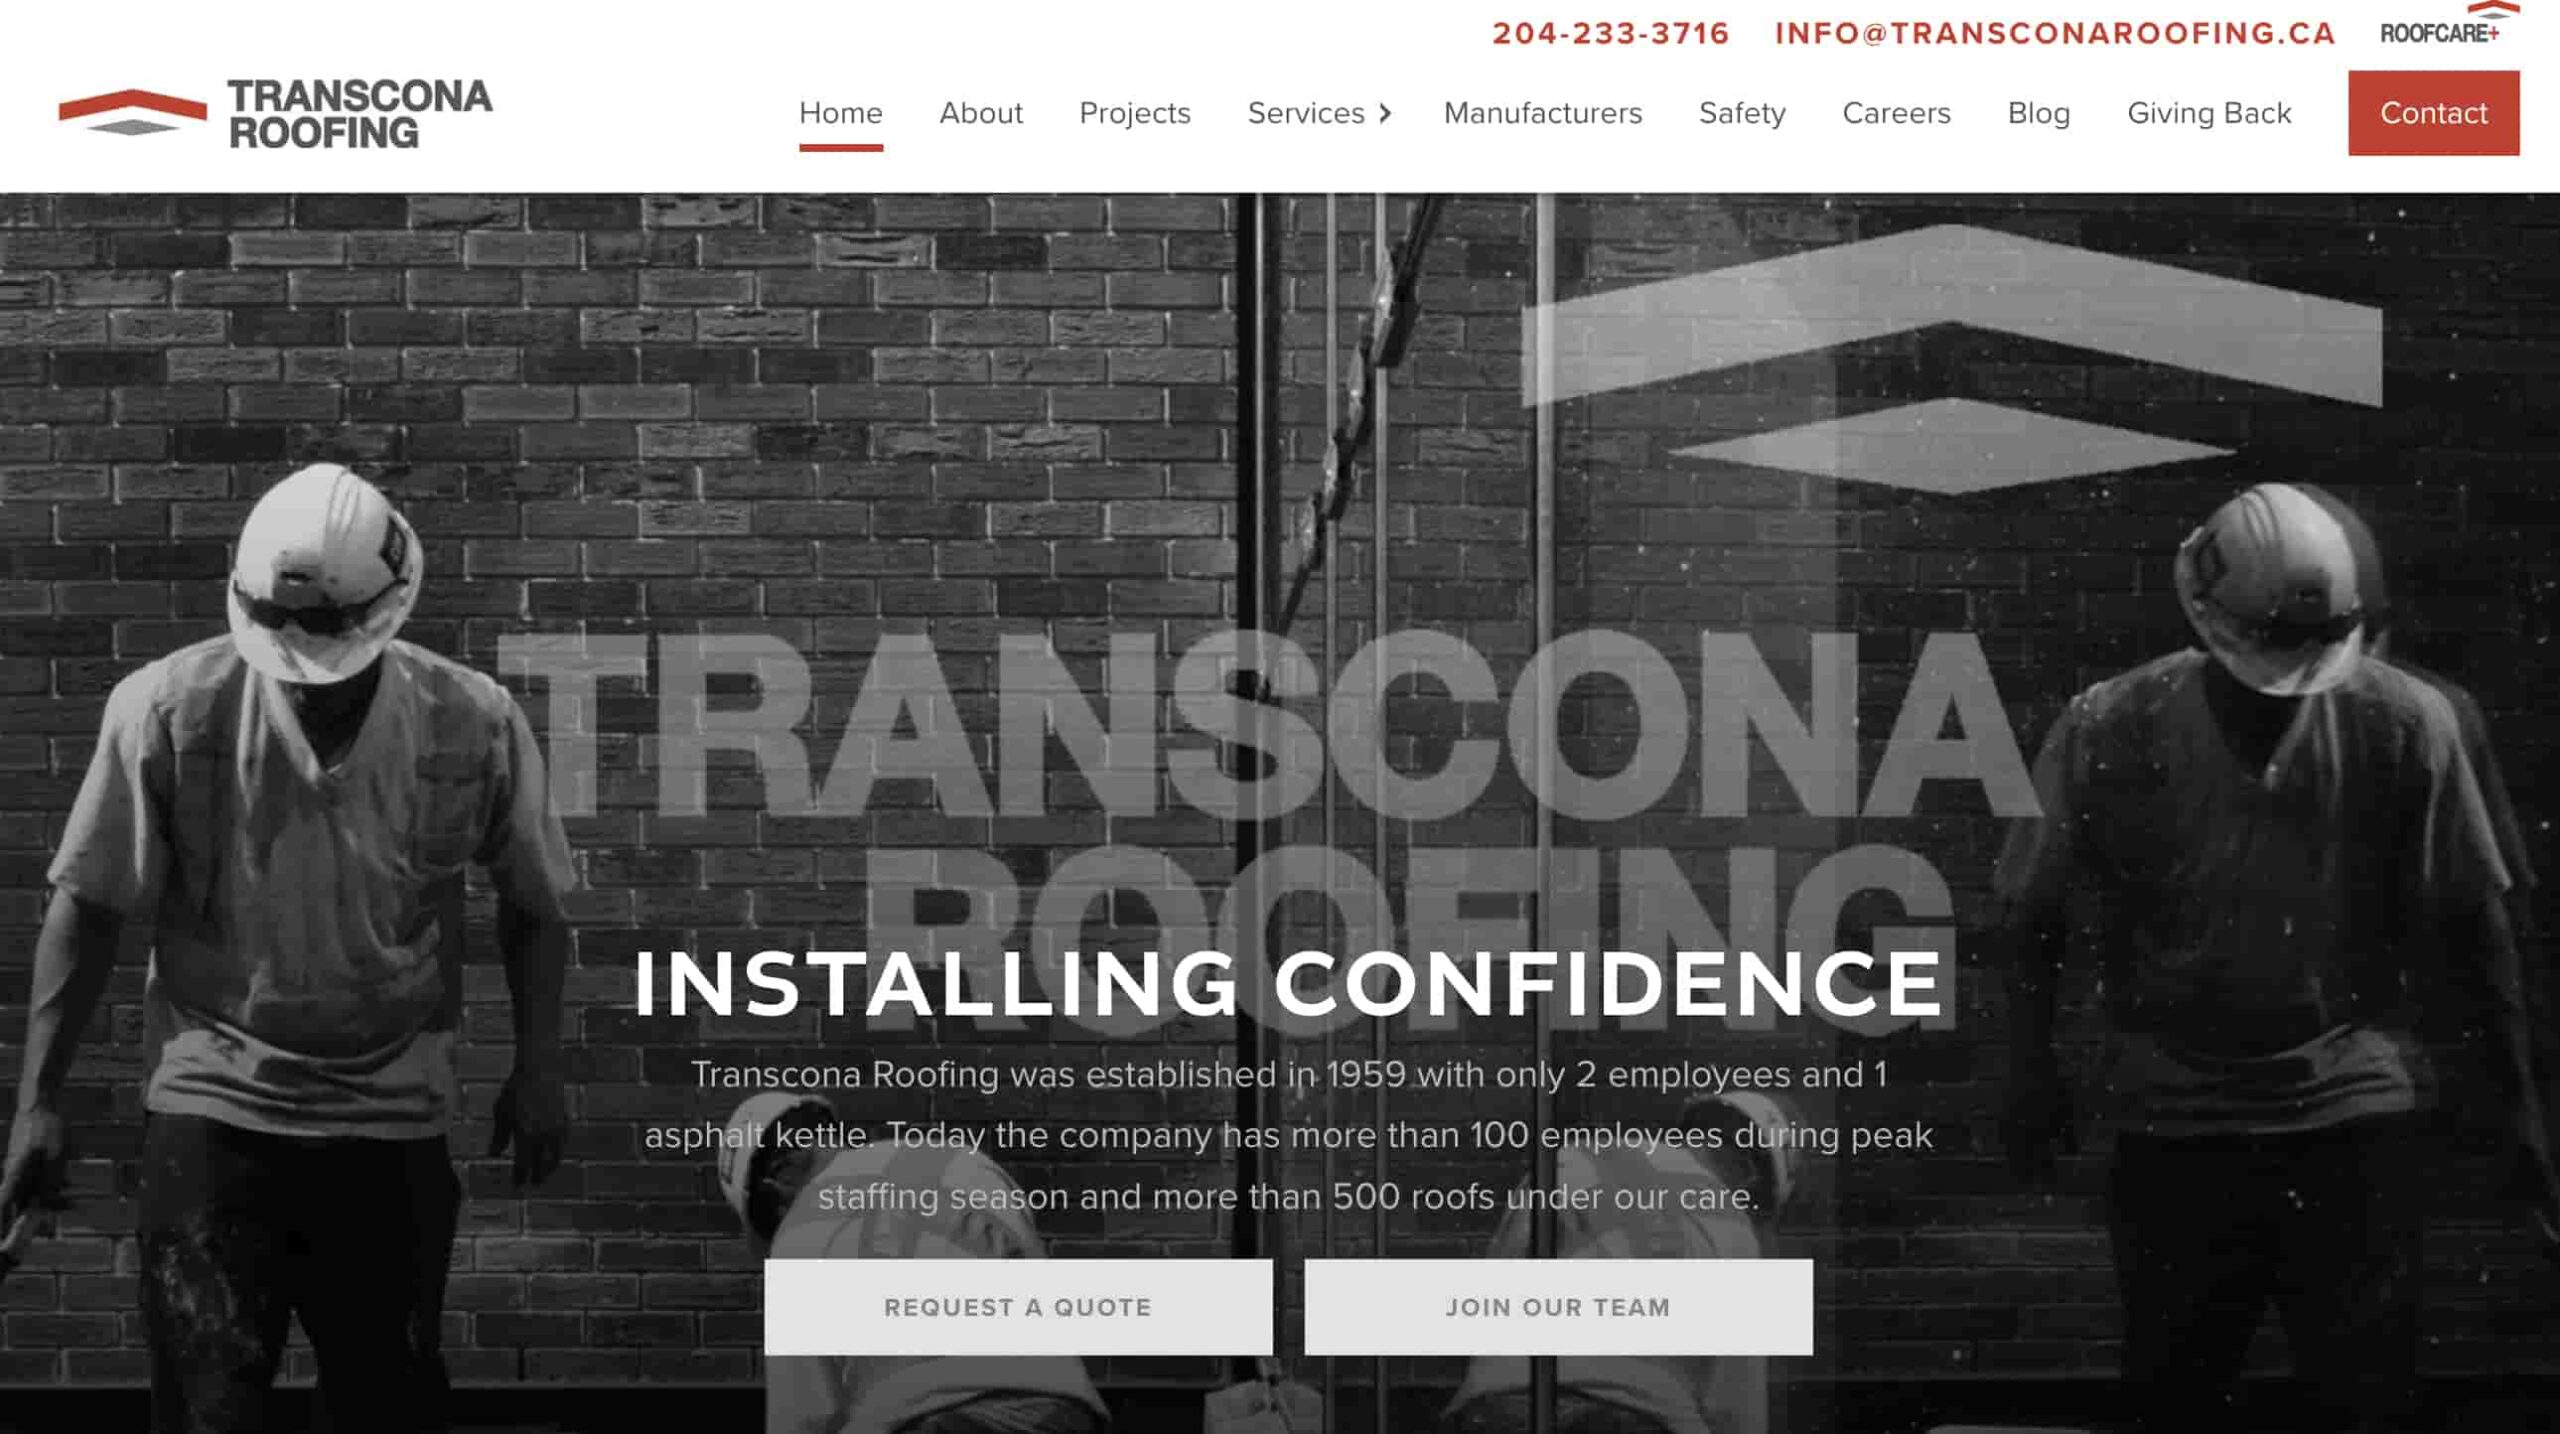 Trascona Roofing